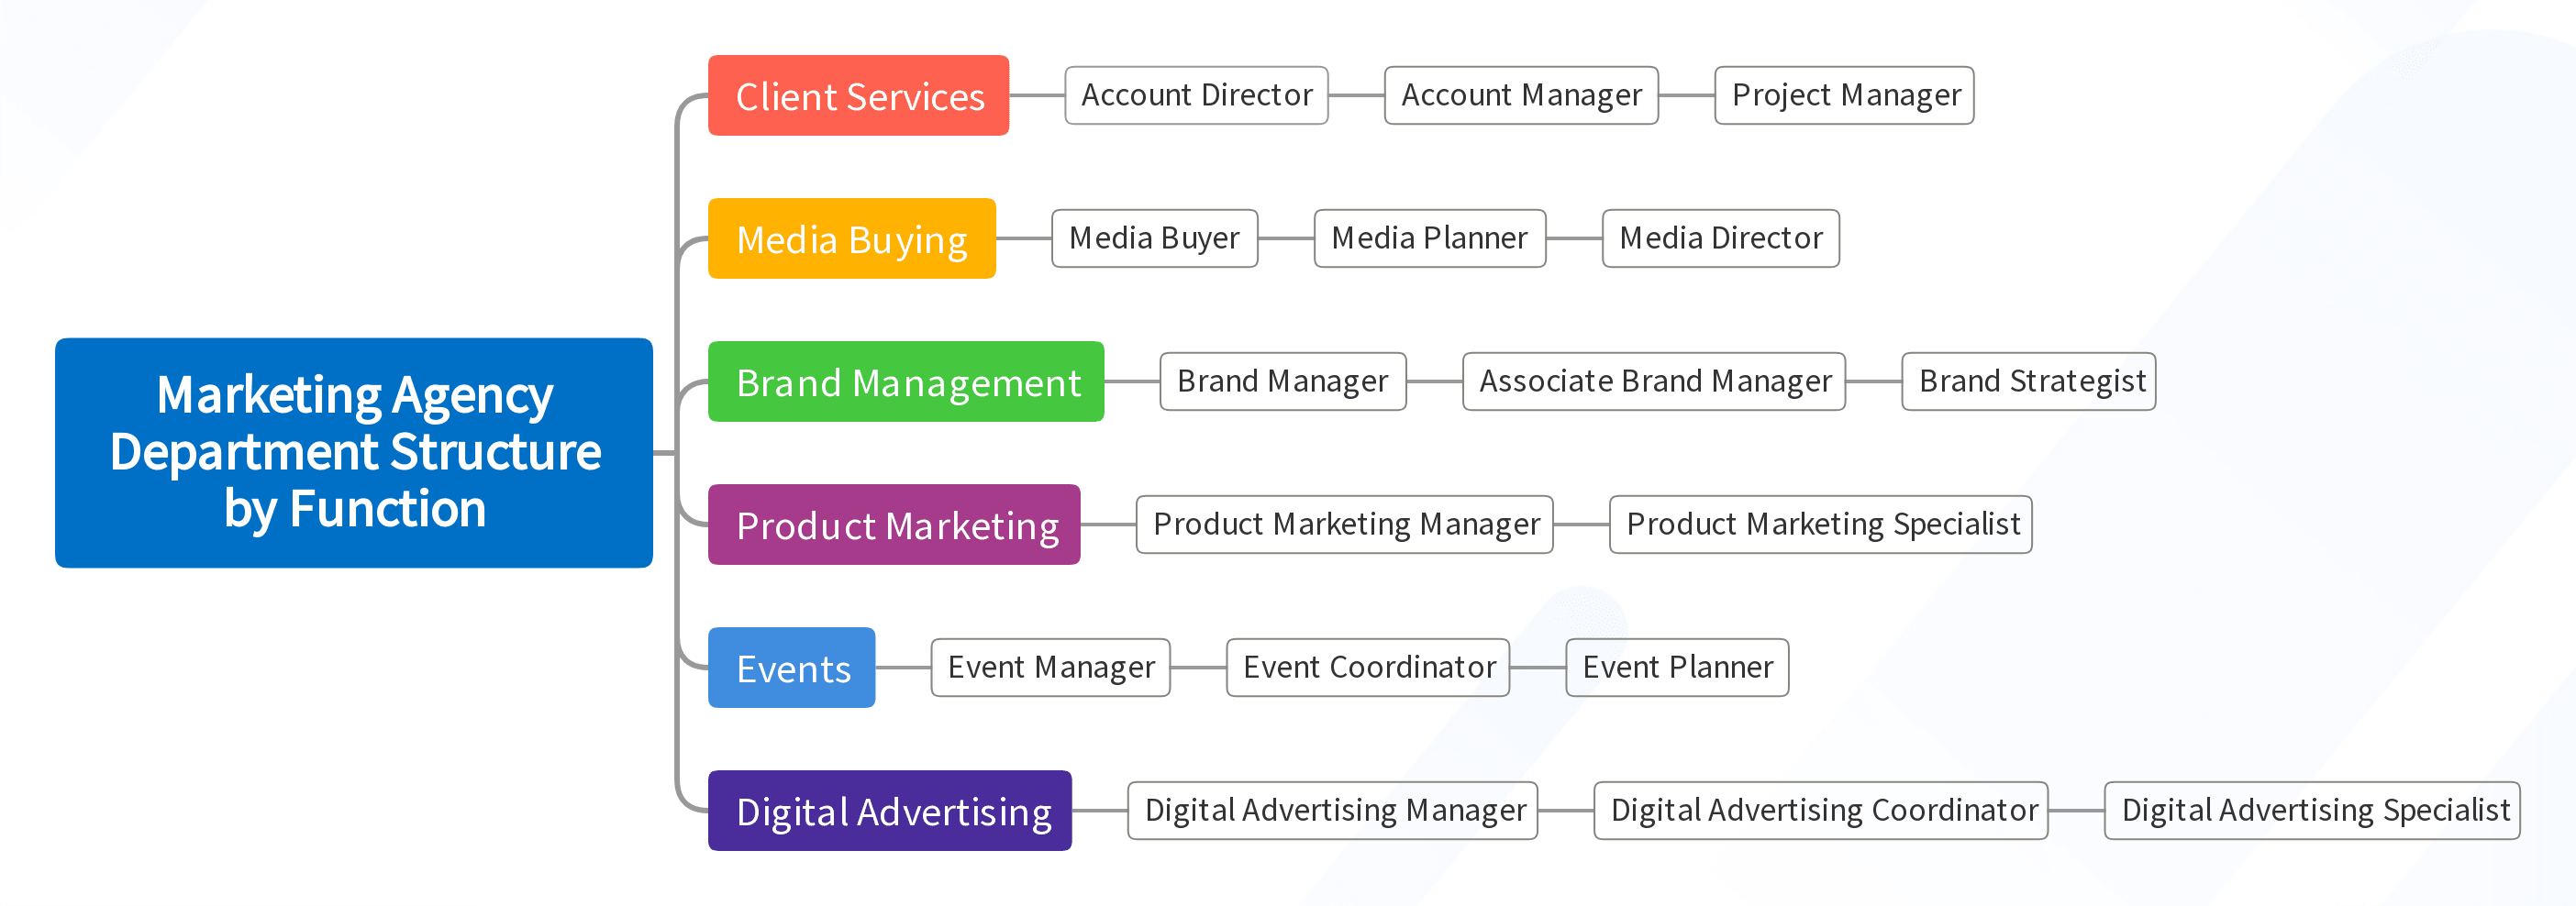 Marketing Agency Department Structure by Function